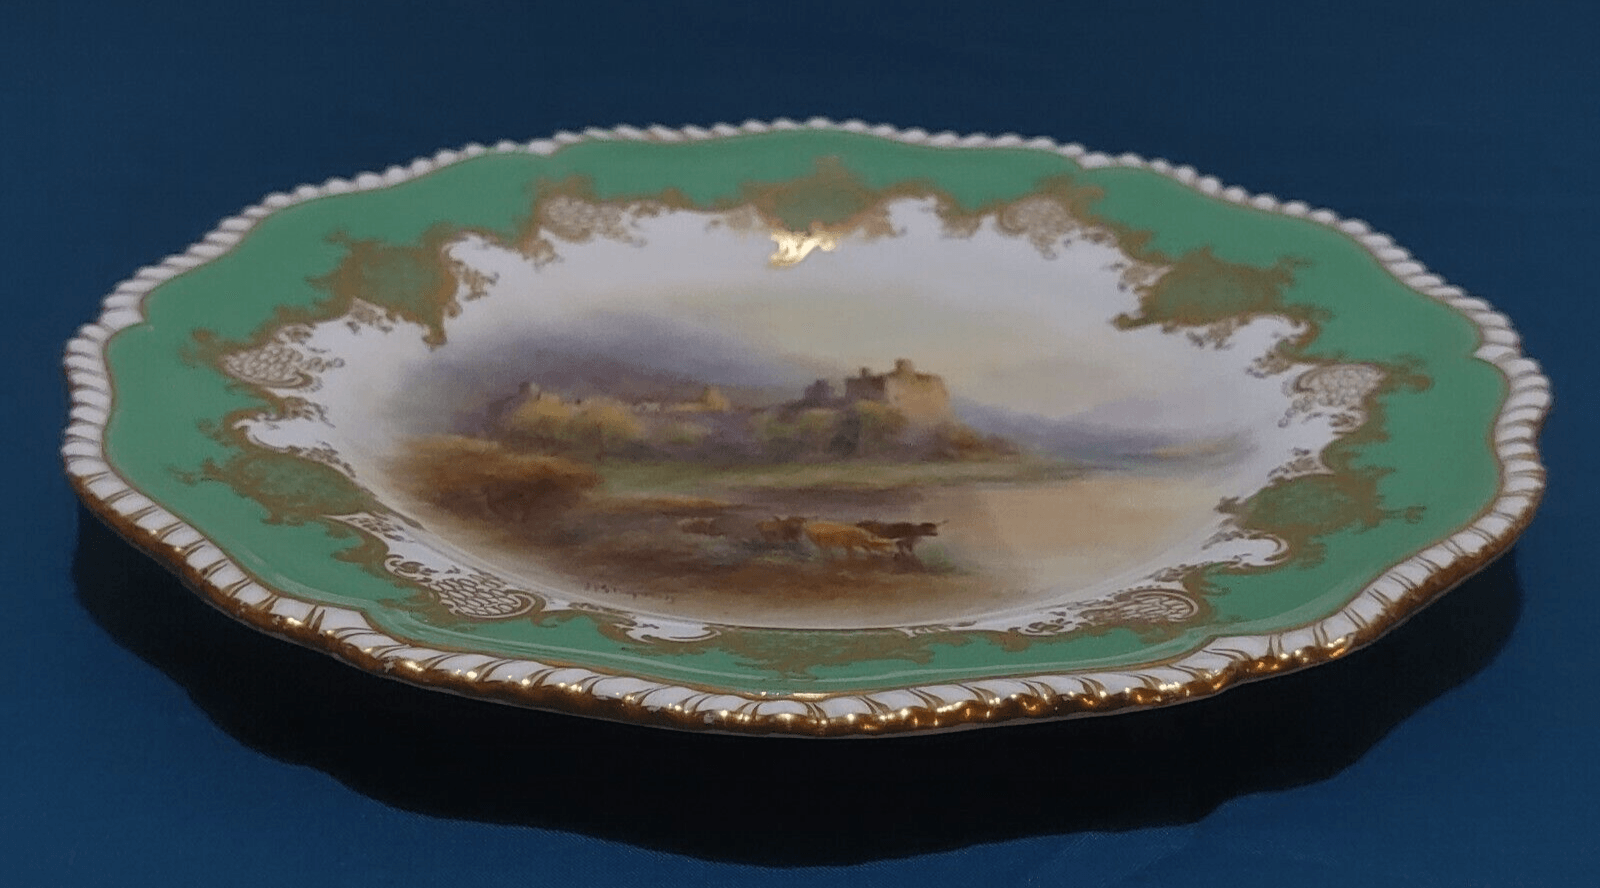 Antique 1921 Royal Worcester Plate Highland Cattle Kilchurn Castle by H. Stinton - Tommy's Treasure